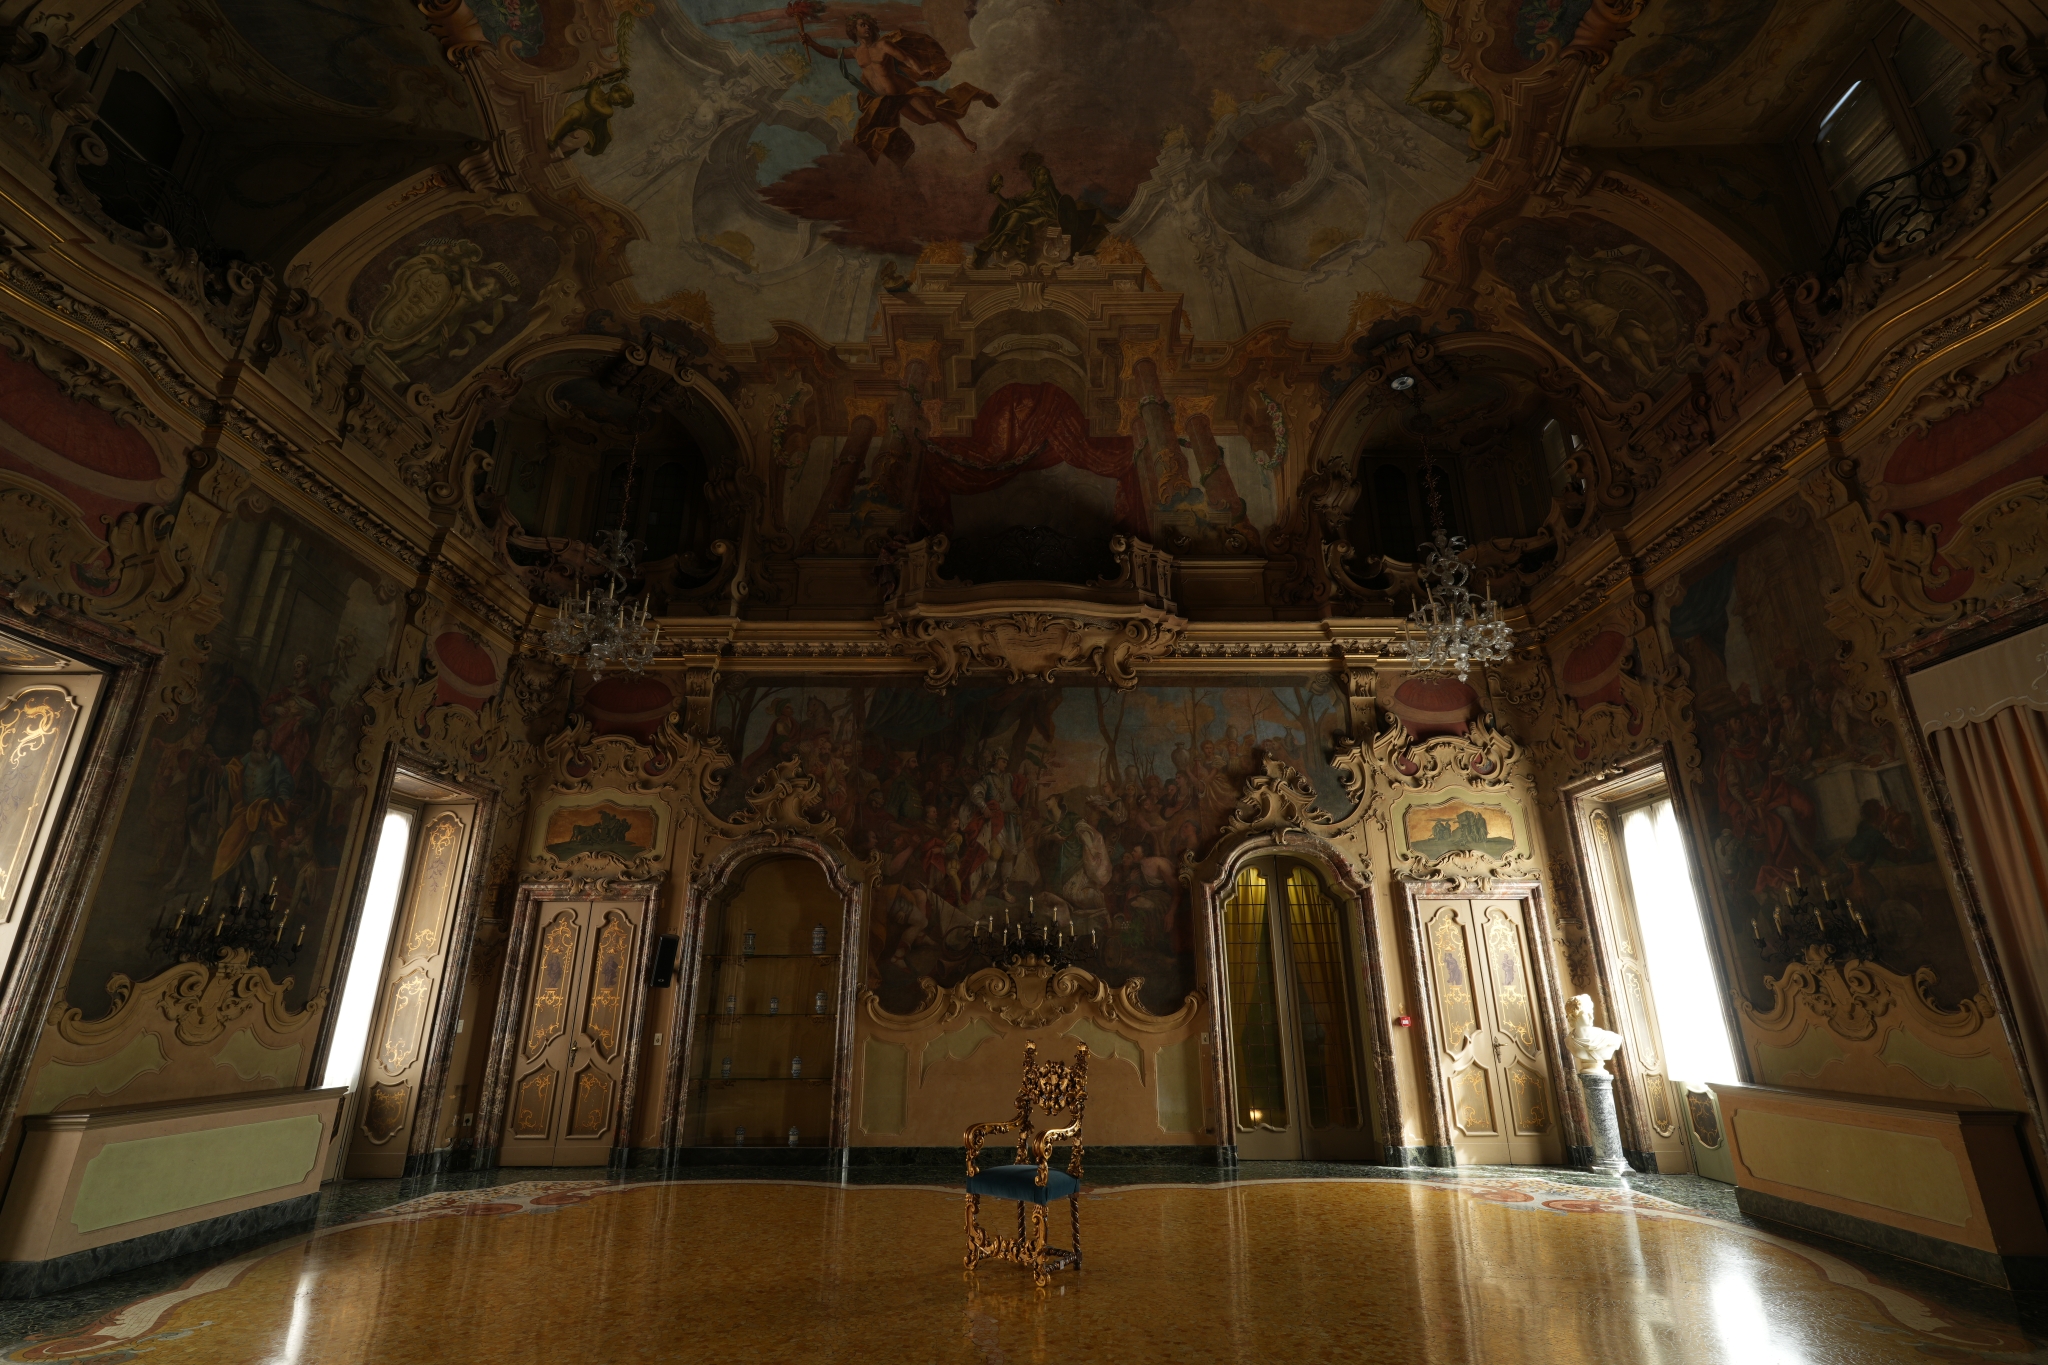 Room with wall and ceiling paintings